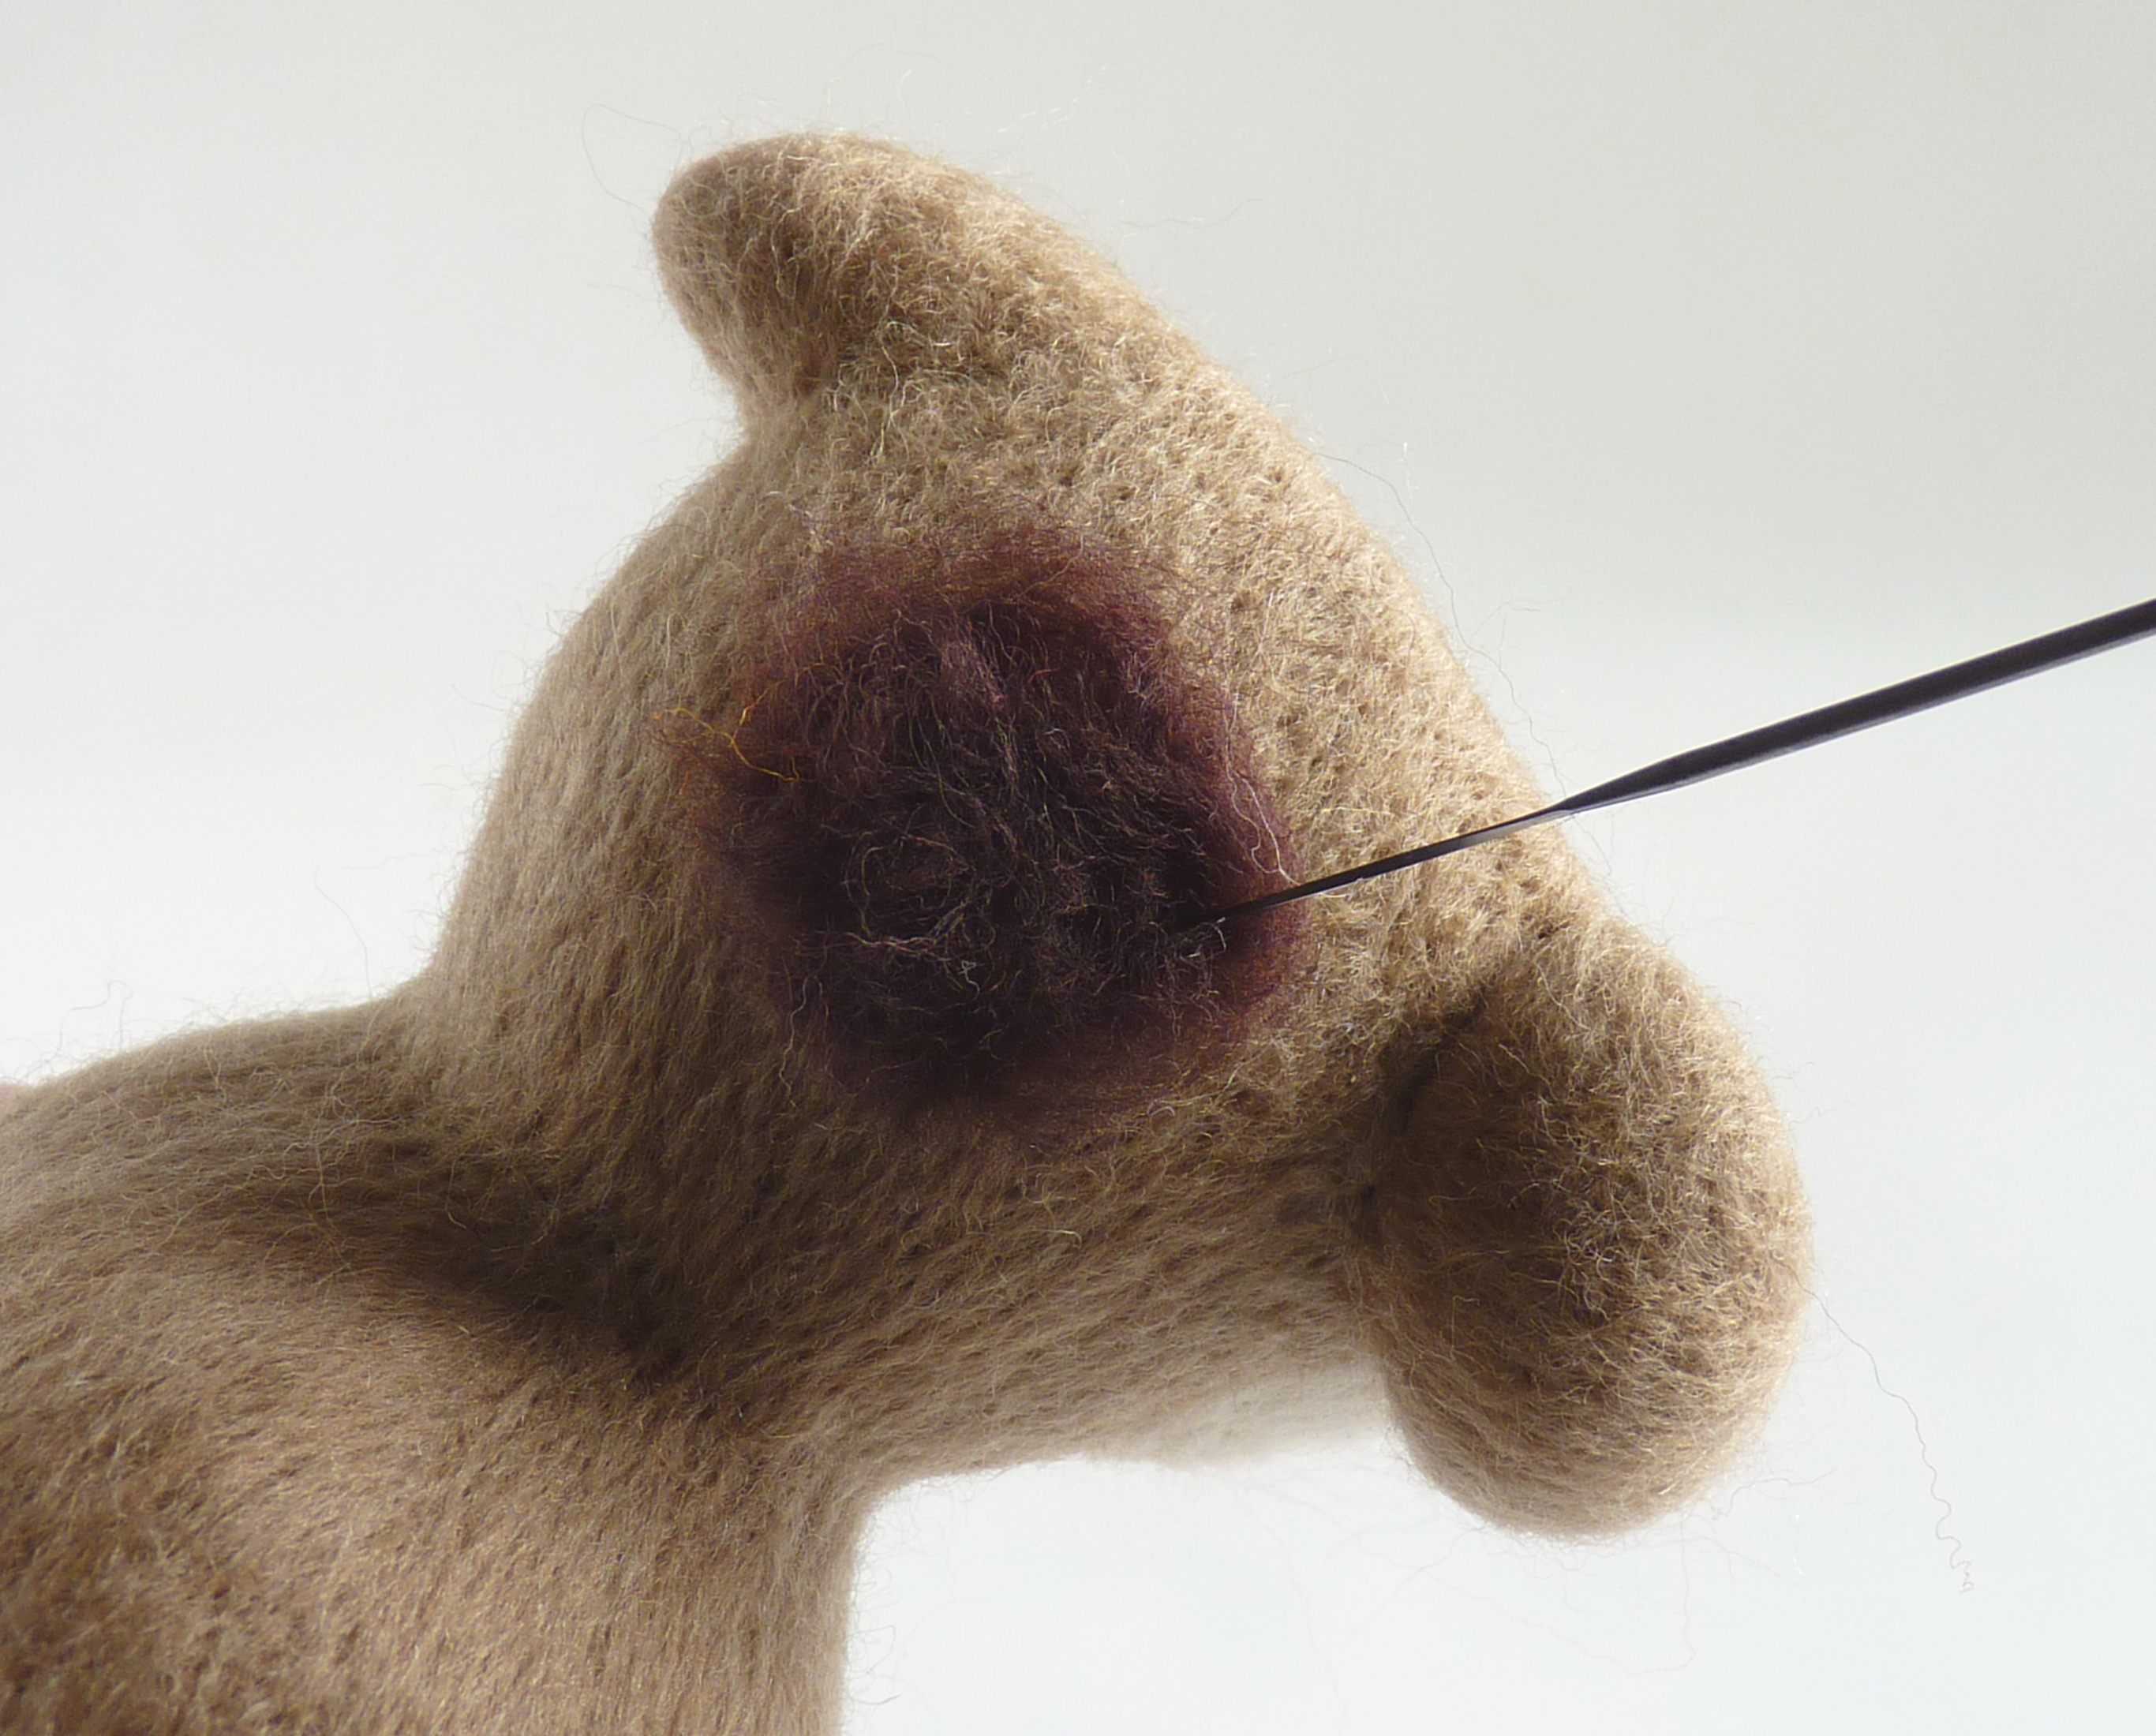 How to make needle felted animals - step 14